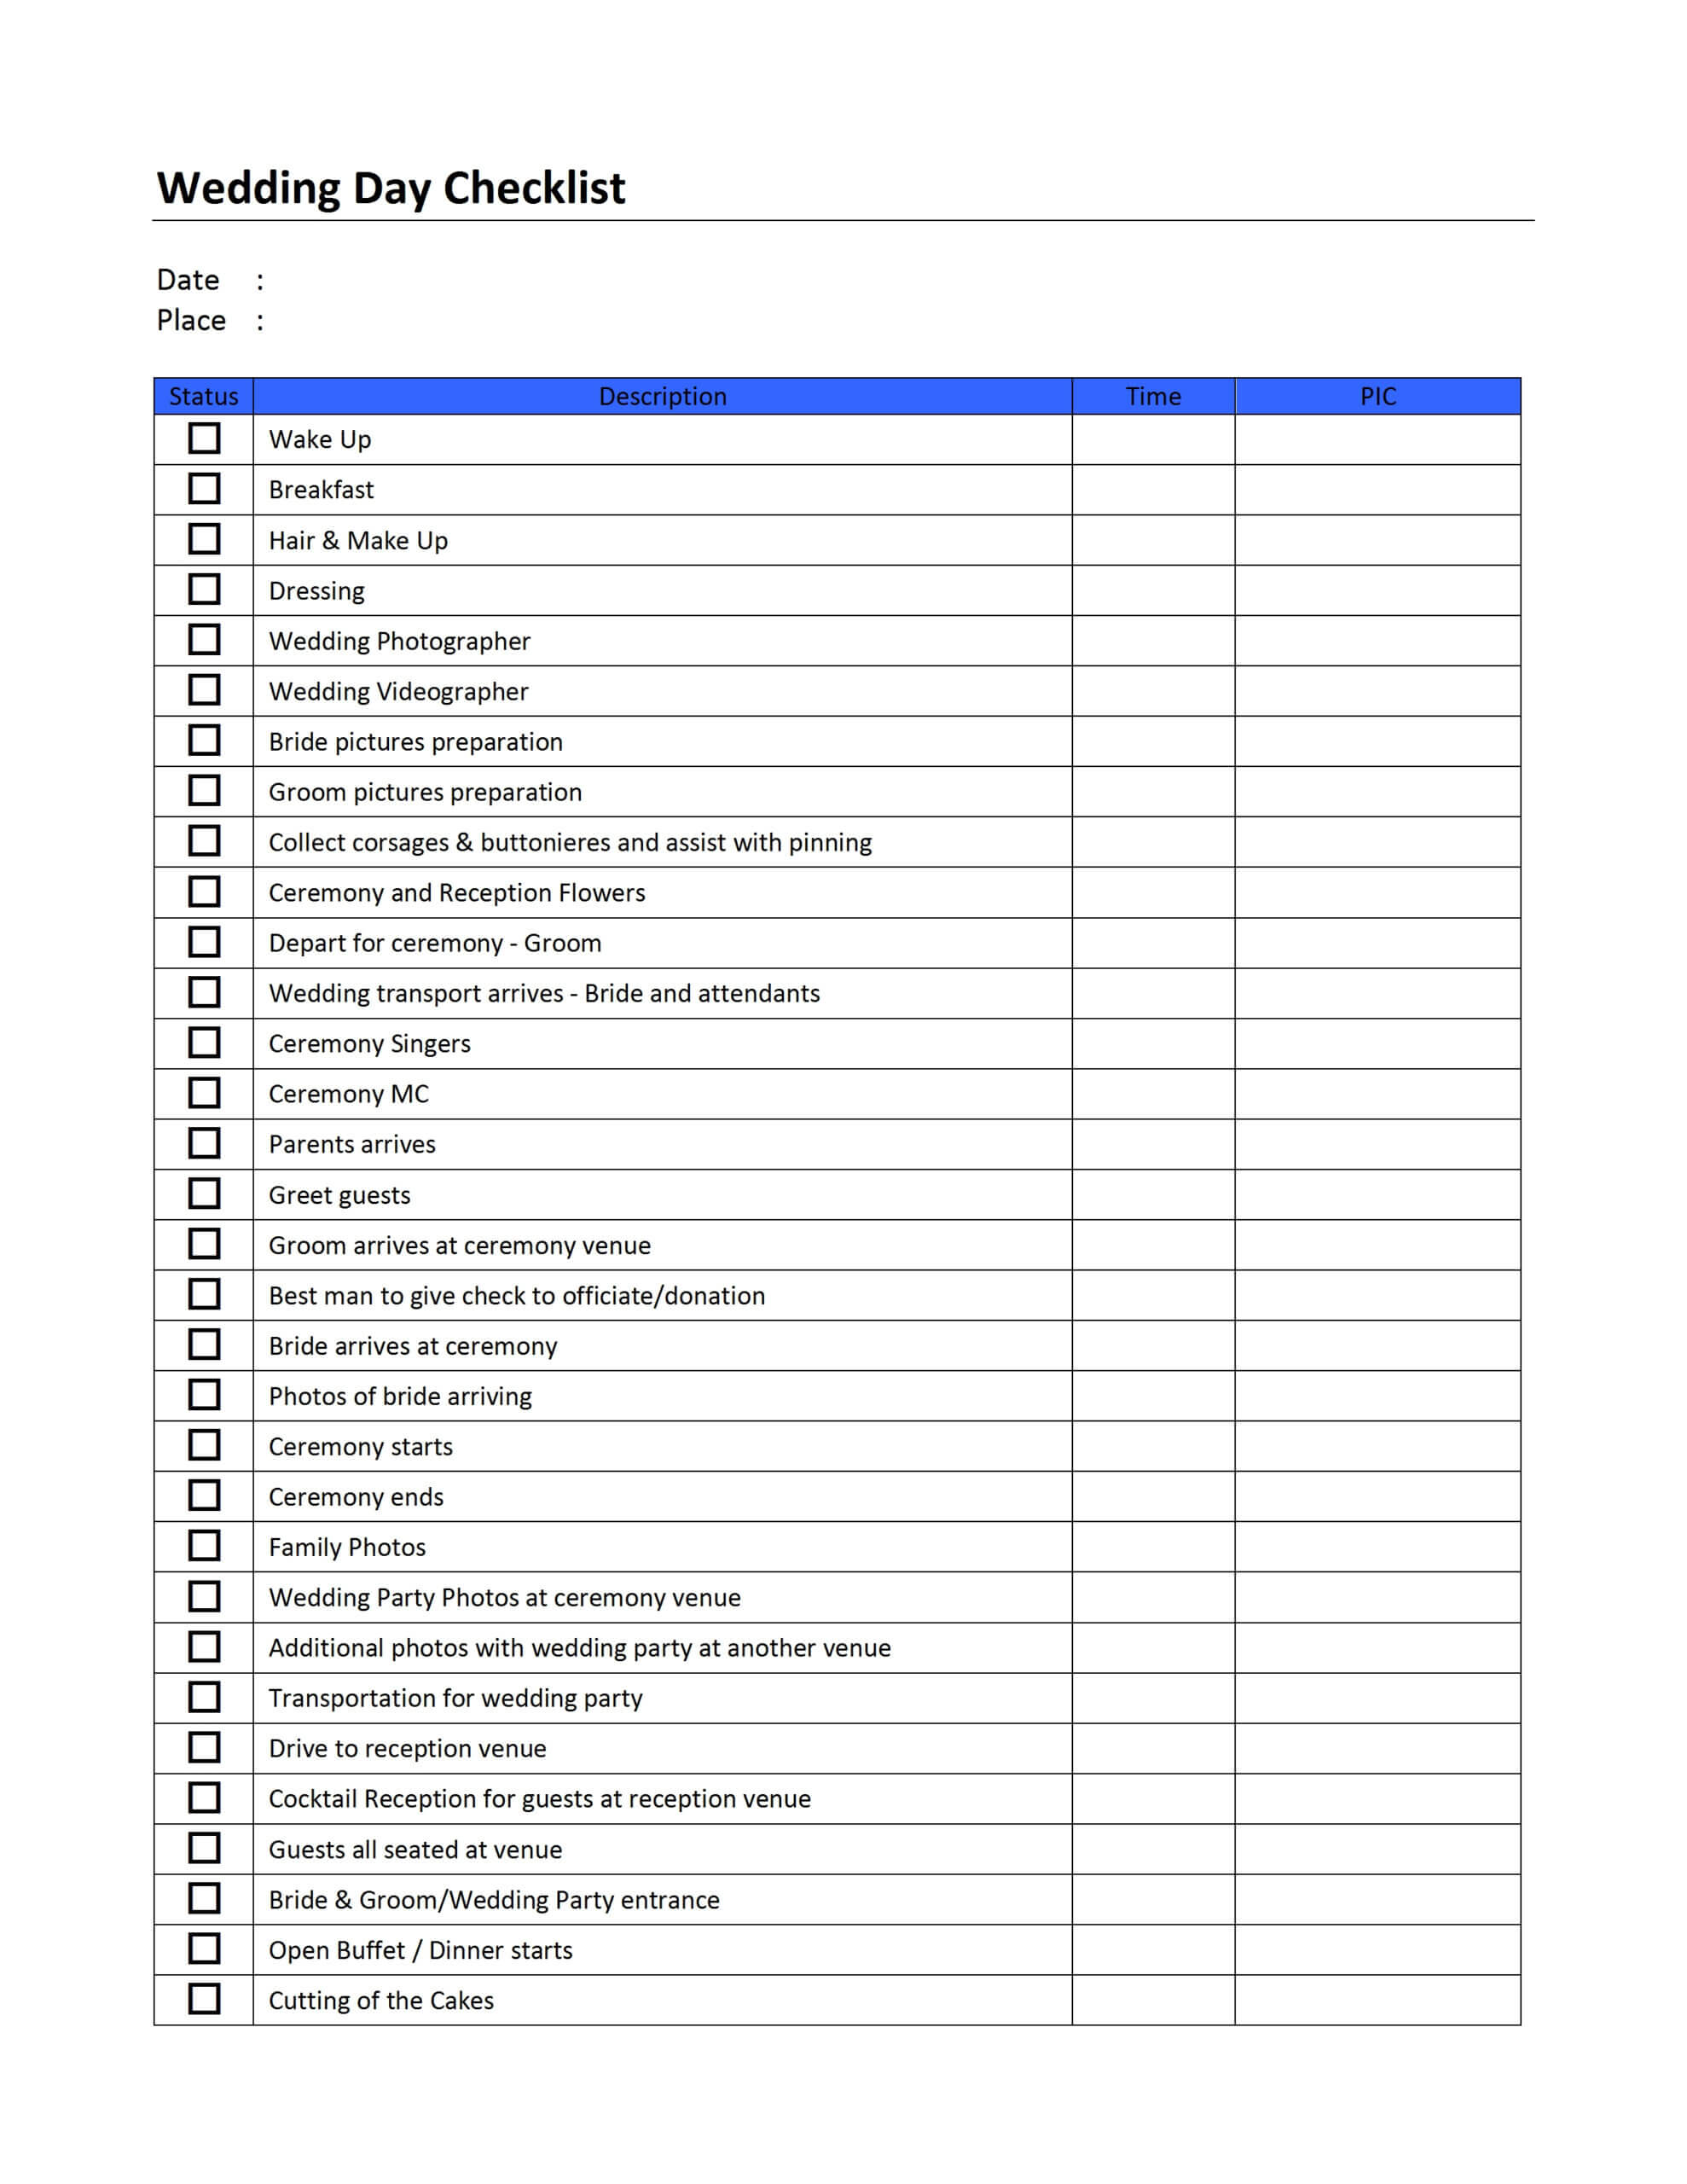 Blank Checklist Template Word 2010 | Administrative In Blank Checklist Template Word